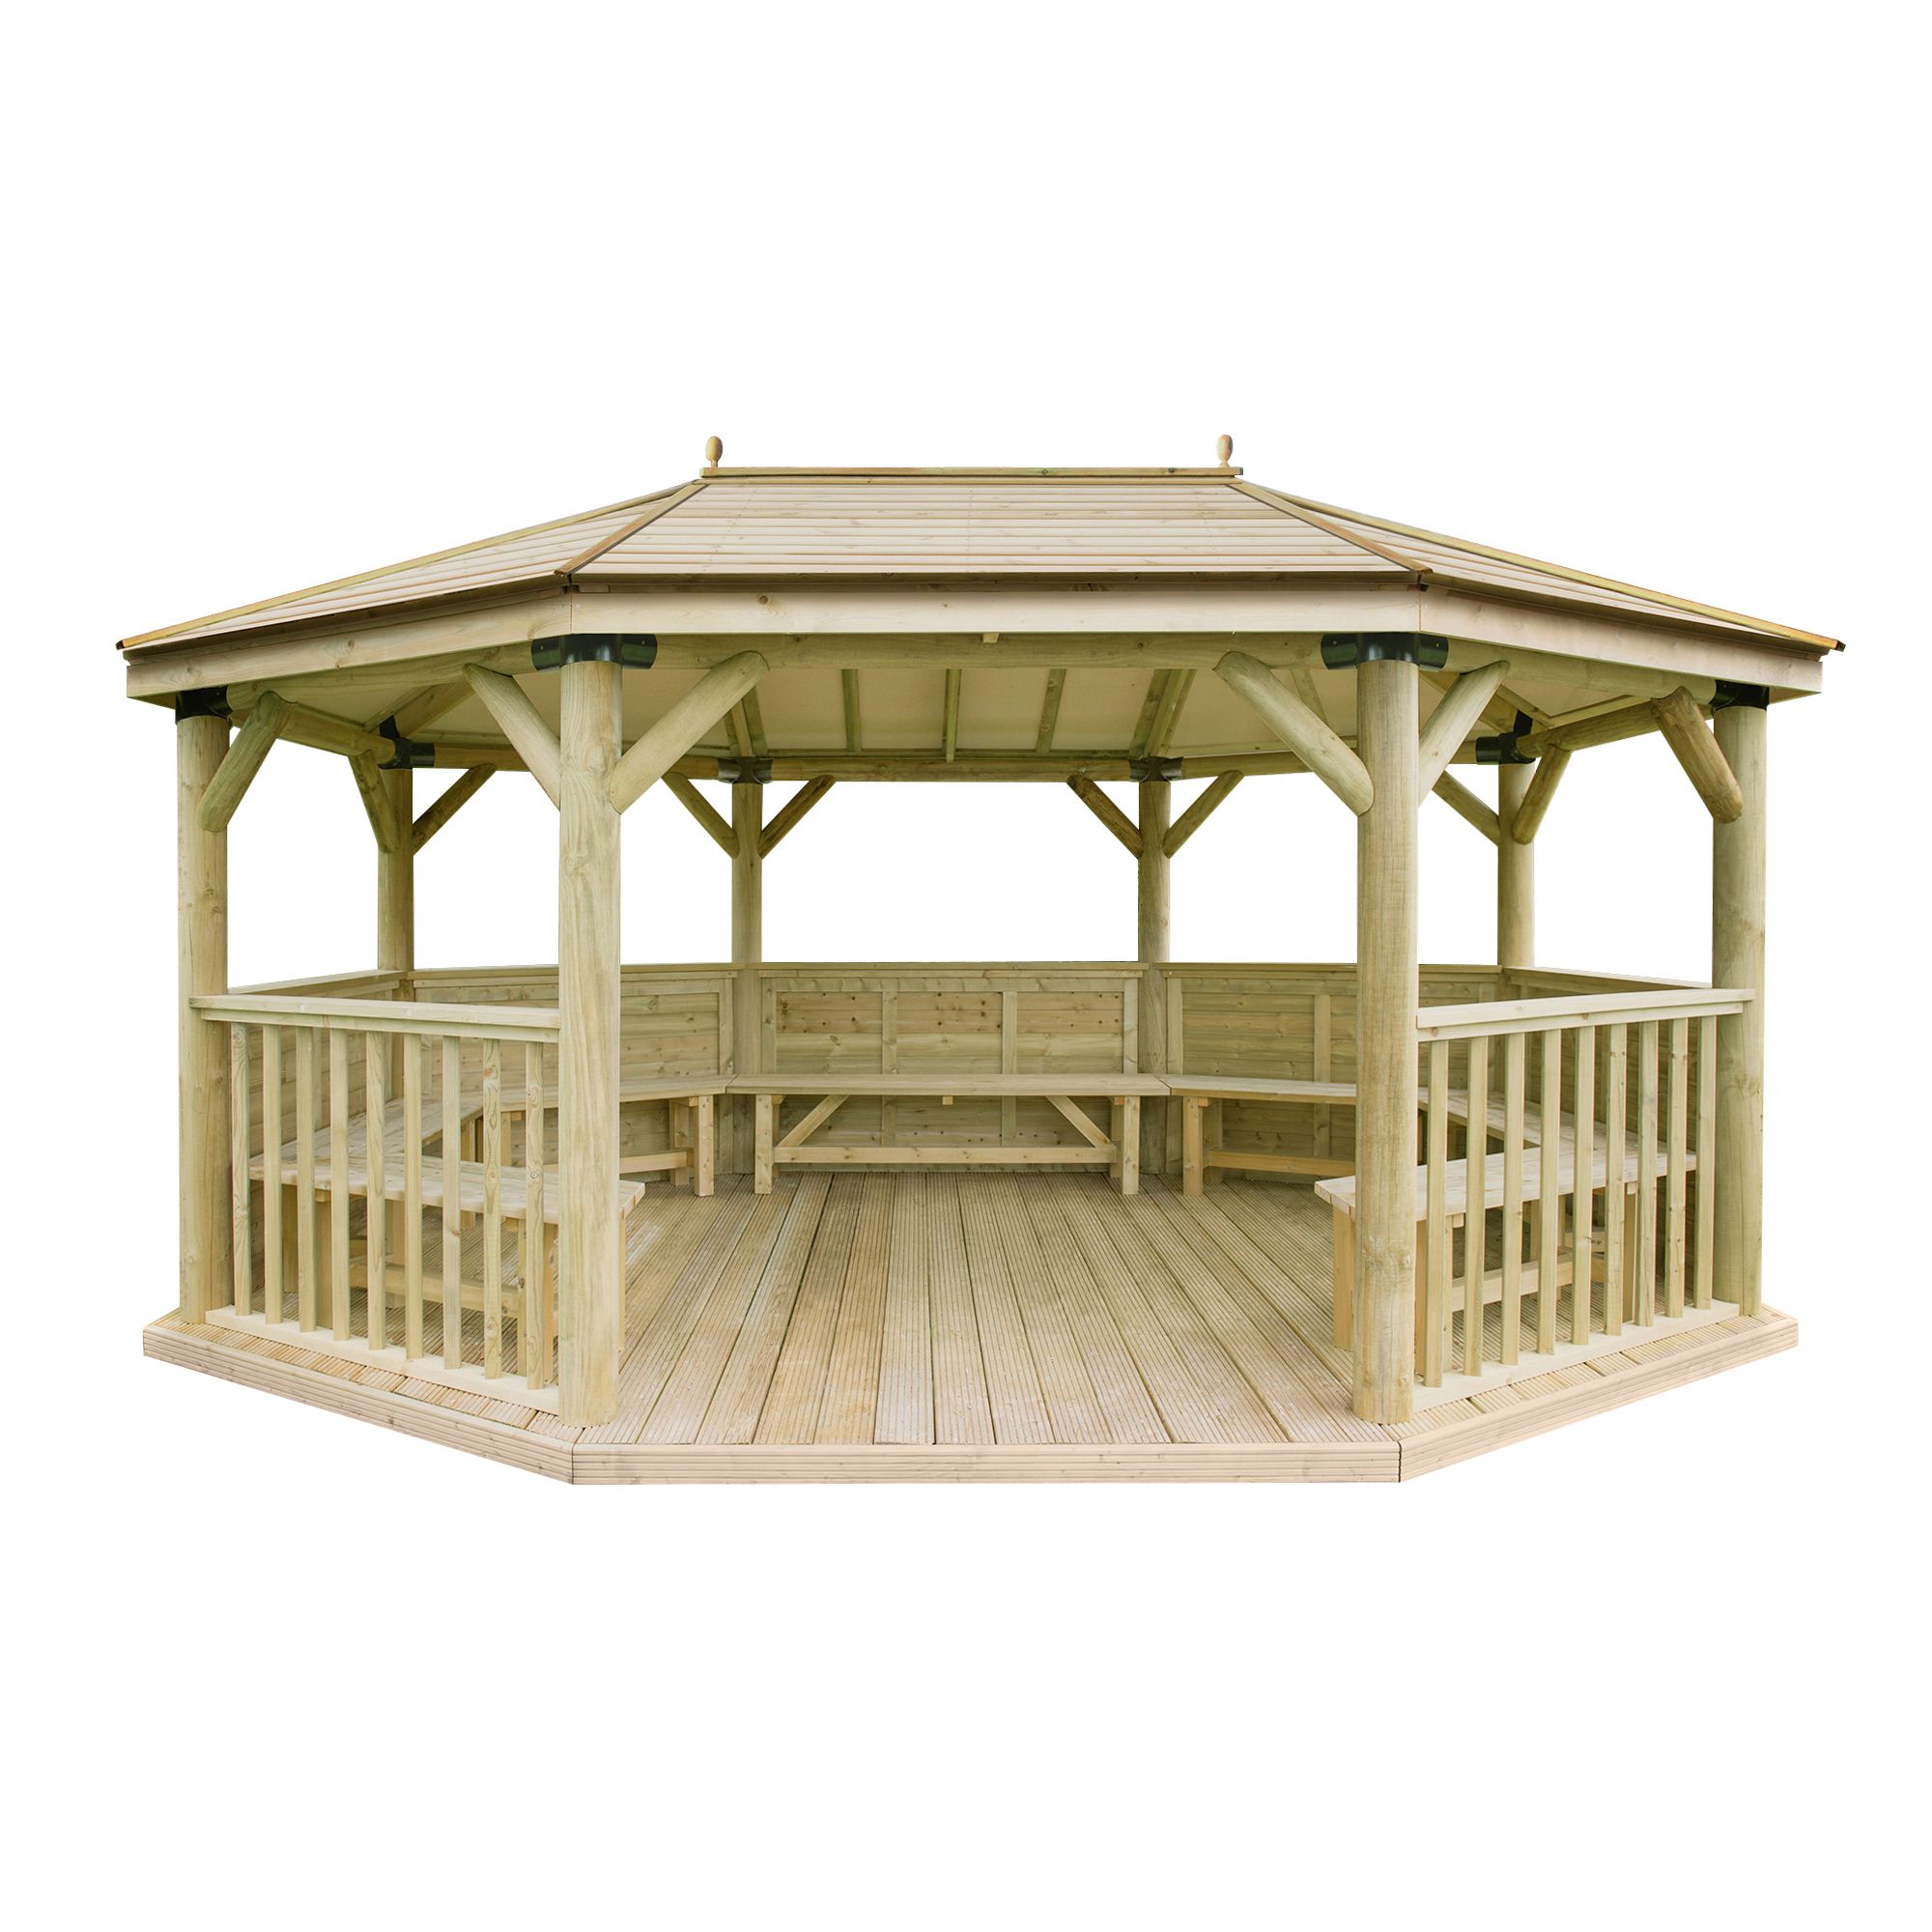 Forest Garden Premium furnished Octagonal Gazebo, (W)5.27m (D)3.78m with Floor included